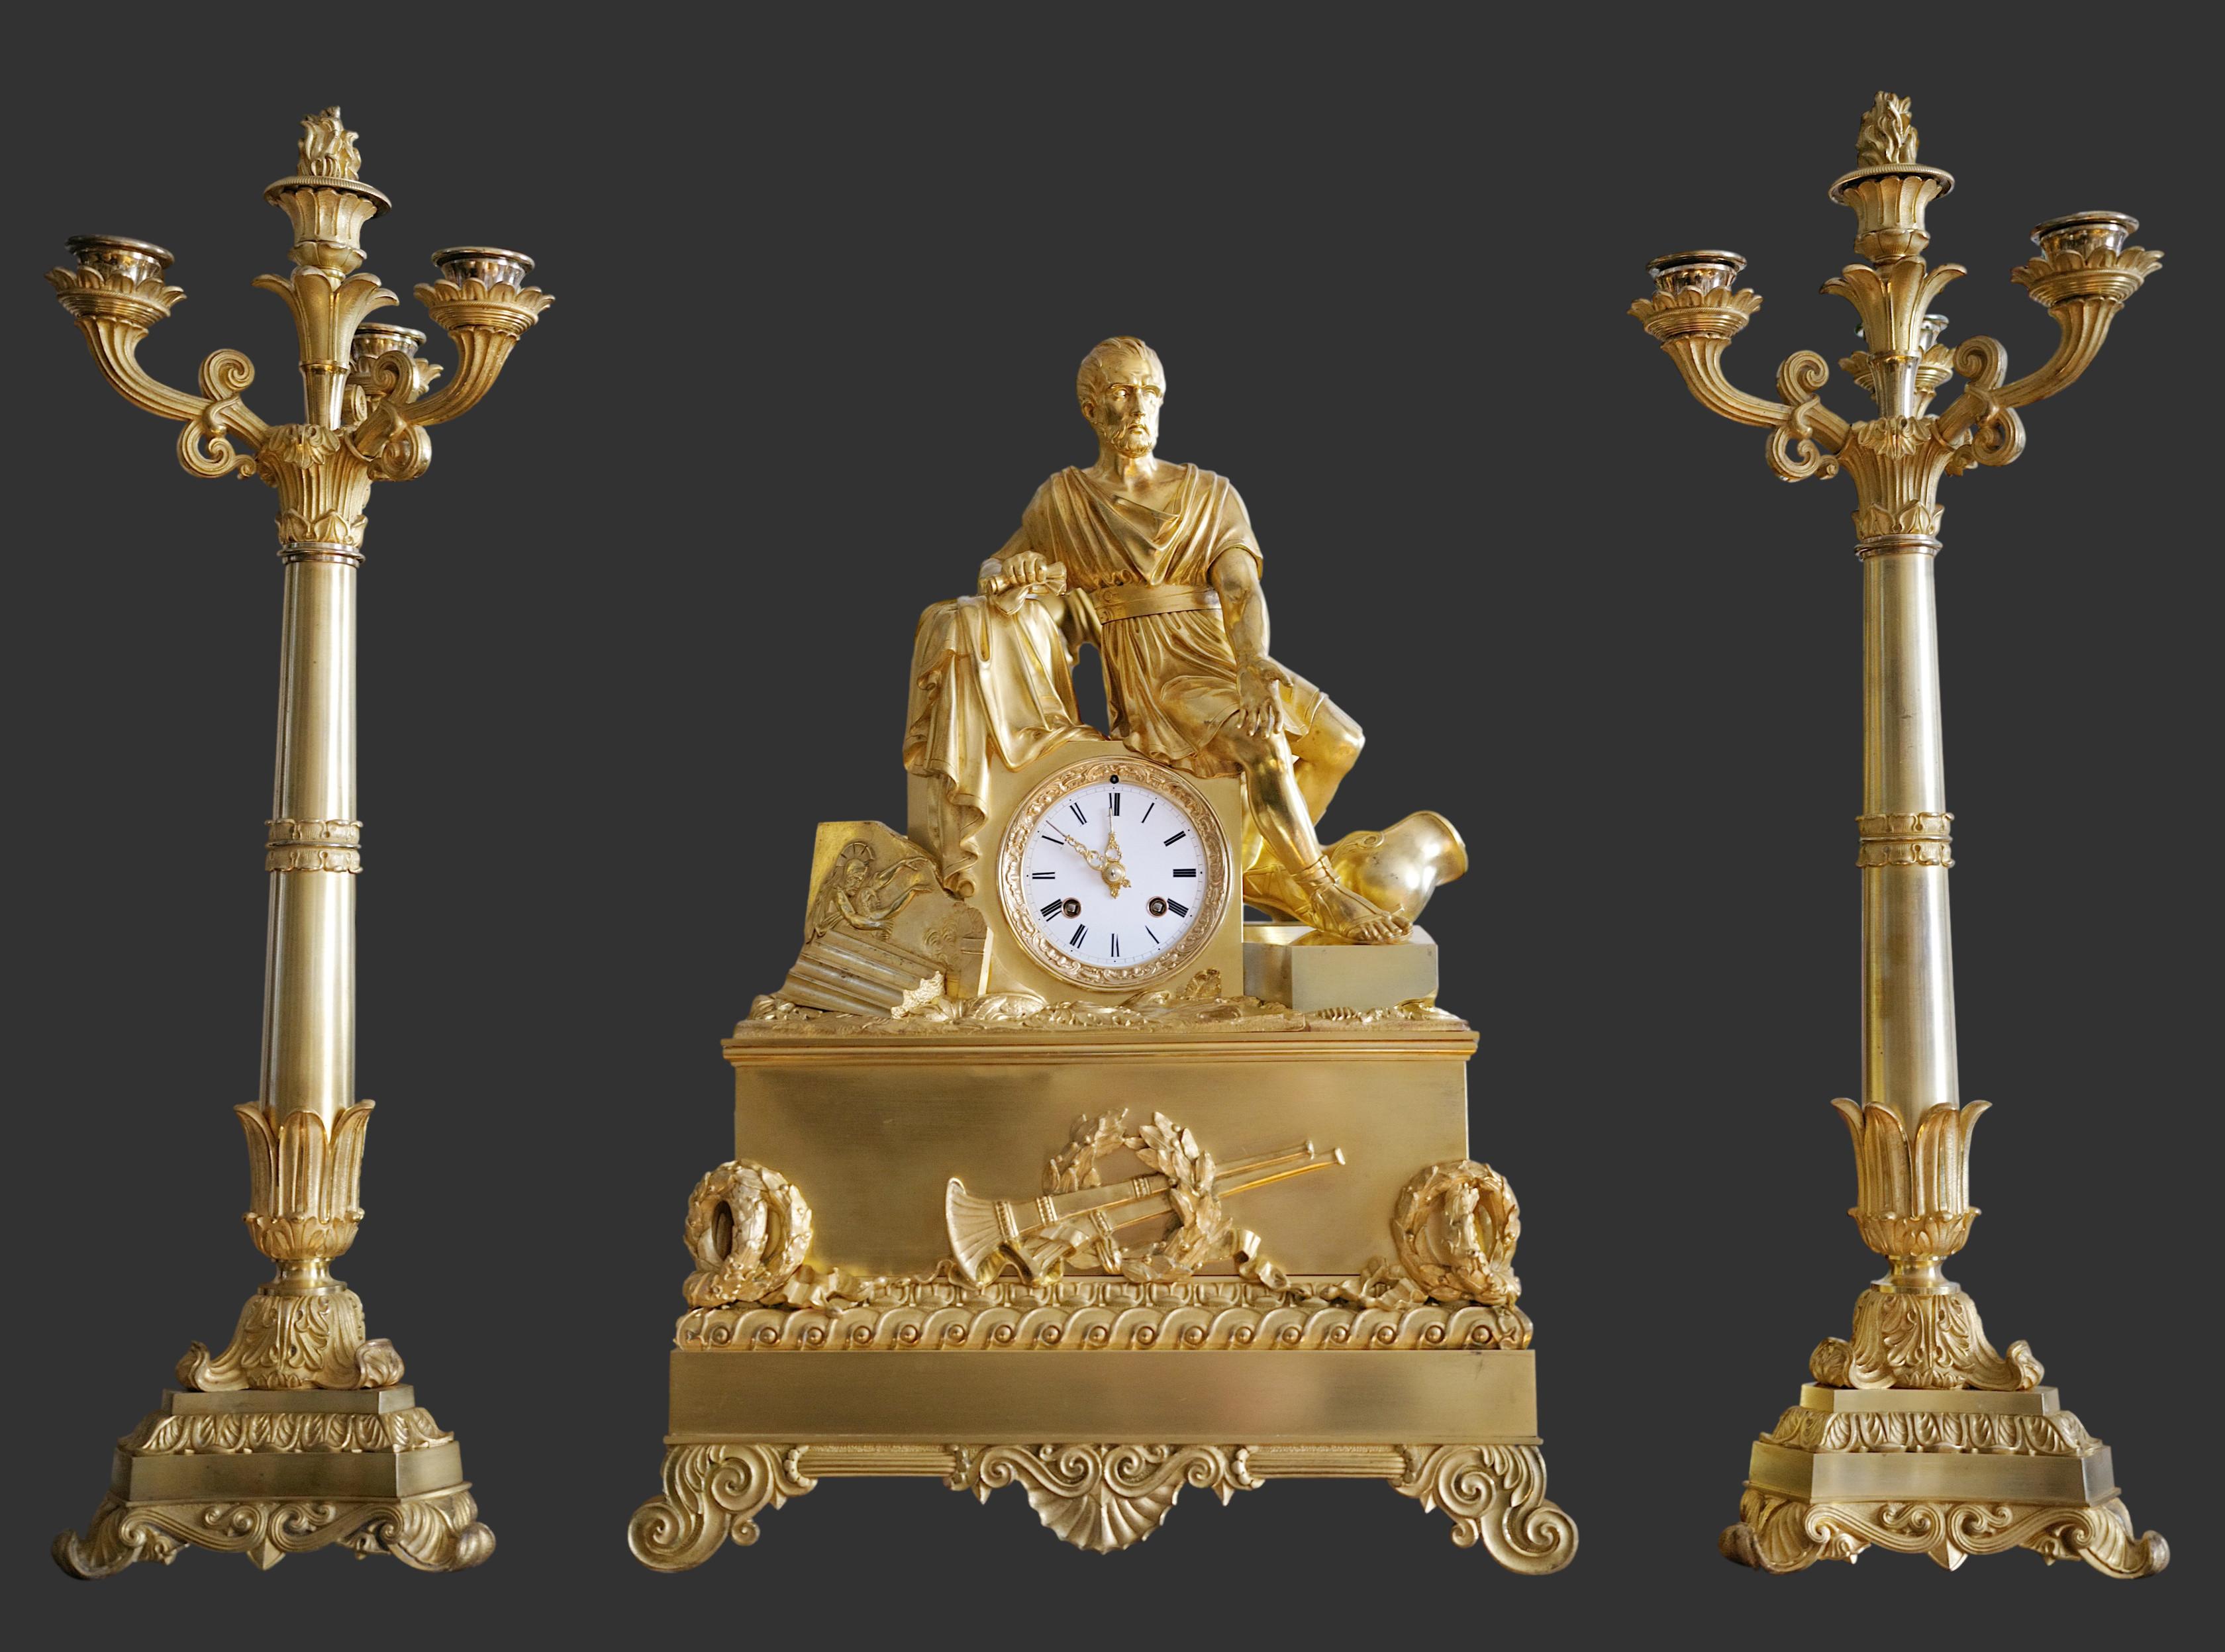 French Restoration bronze mantel clock set, France, 1820-1830s. 1 clock and two candelabras. Original golden patina 2 centuries old. Represents a Roman general seated at the height of his glory. The iconography highlights a collapsed column, a